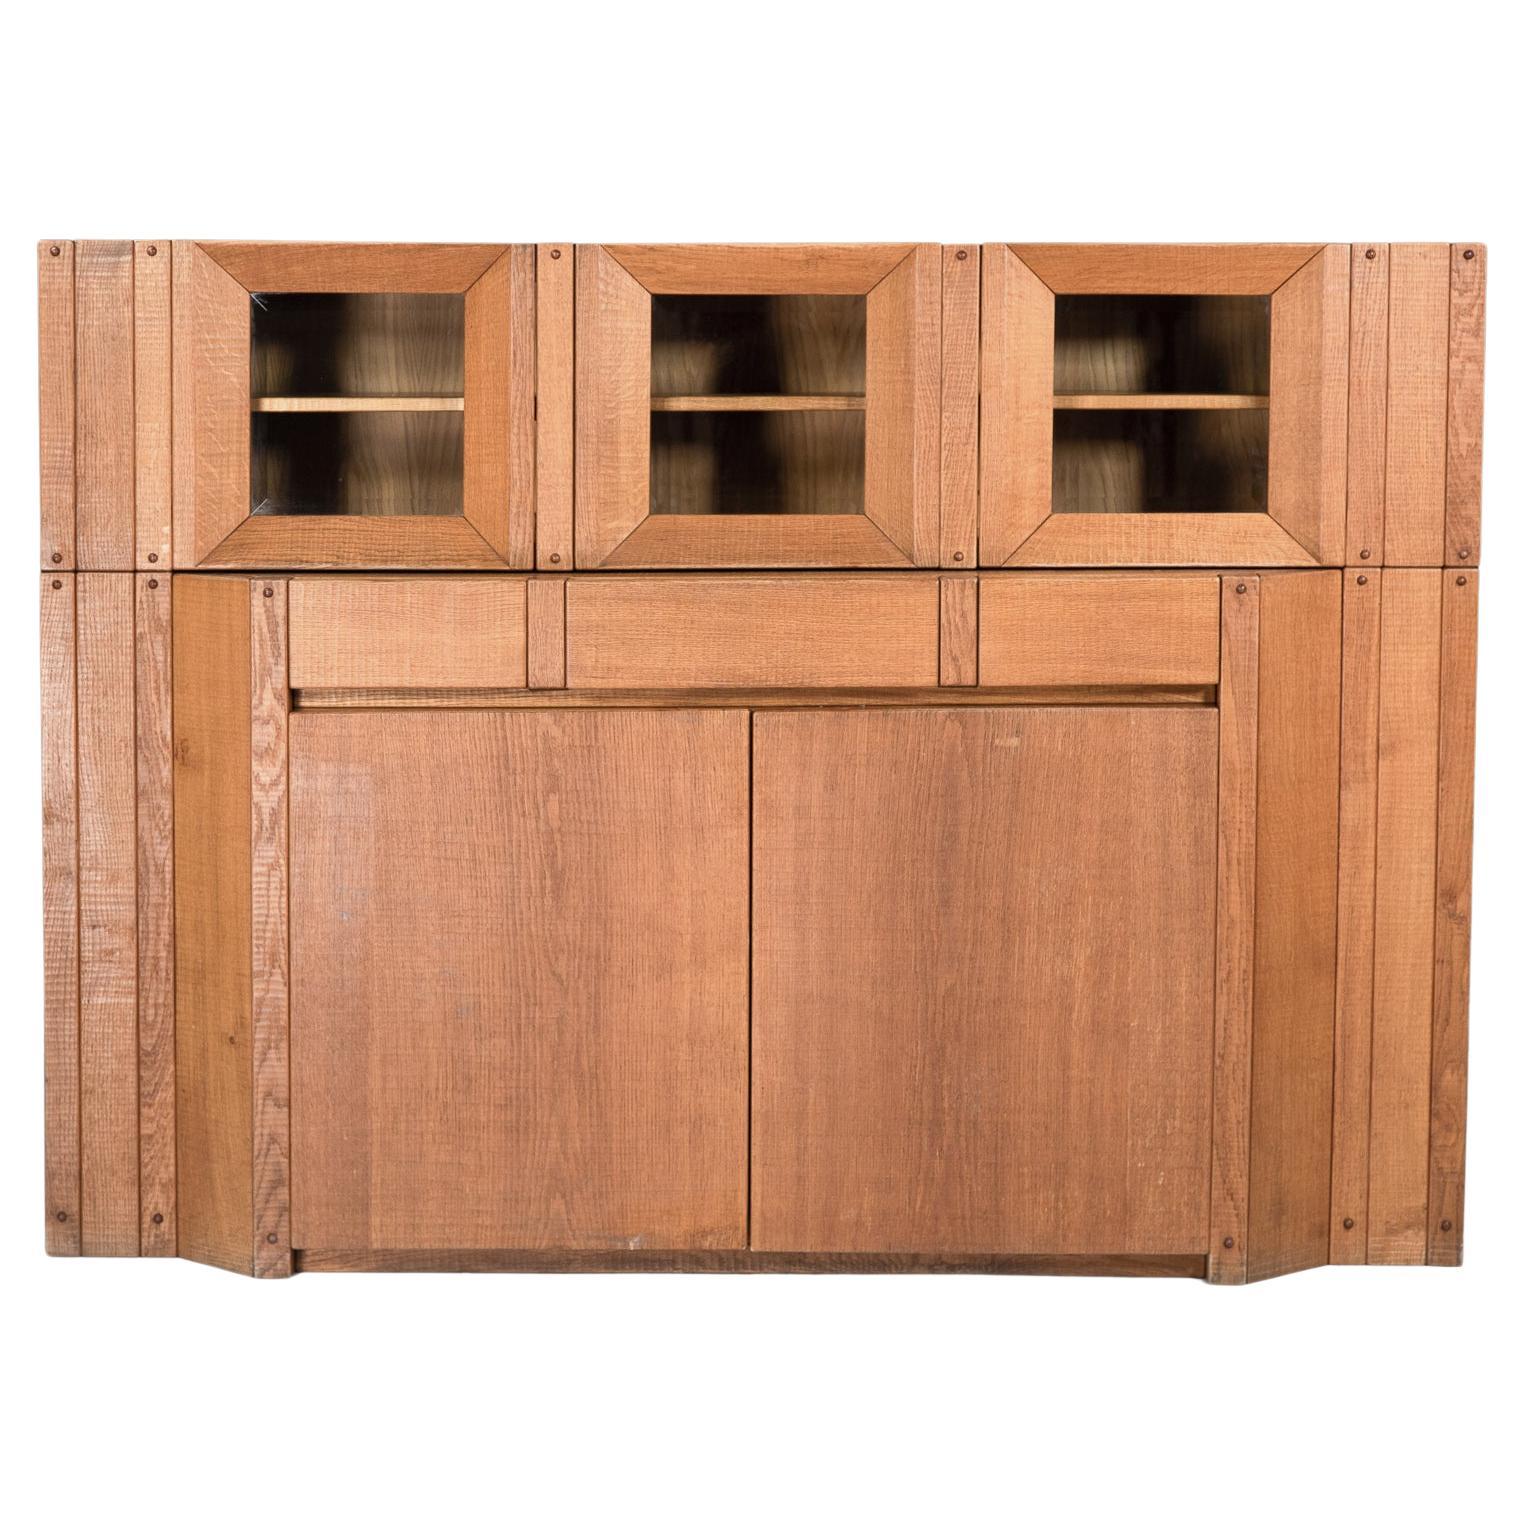 Giuseppe Rivadossi Glazed Credenza in Oak, Italy, in the 1970s For Sale at  1stDibs